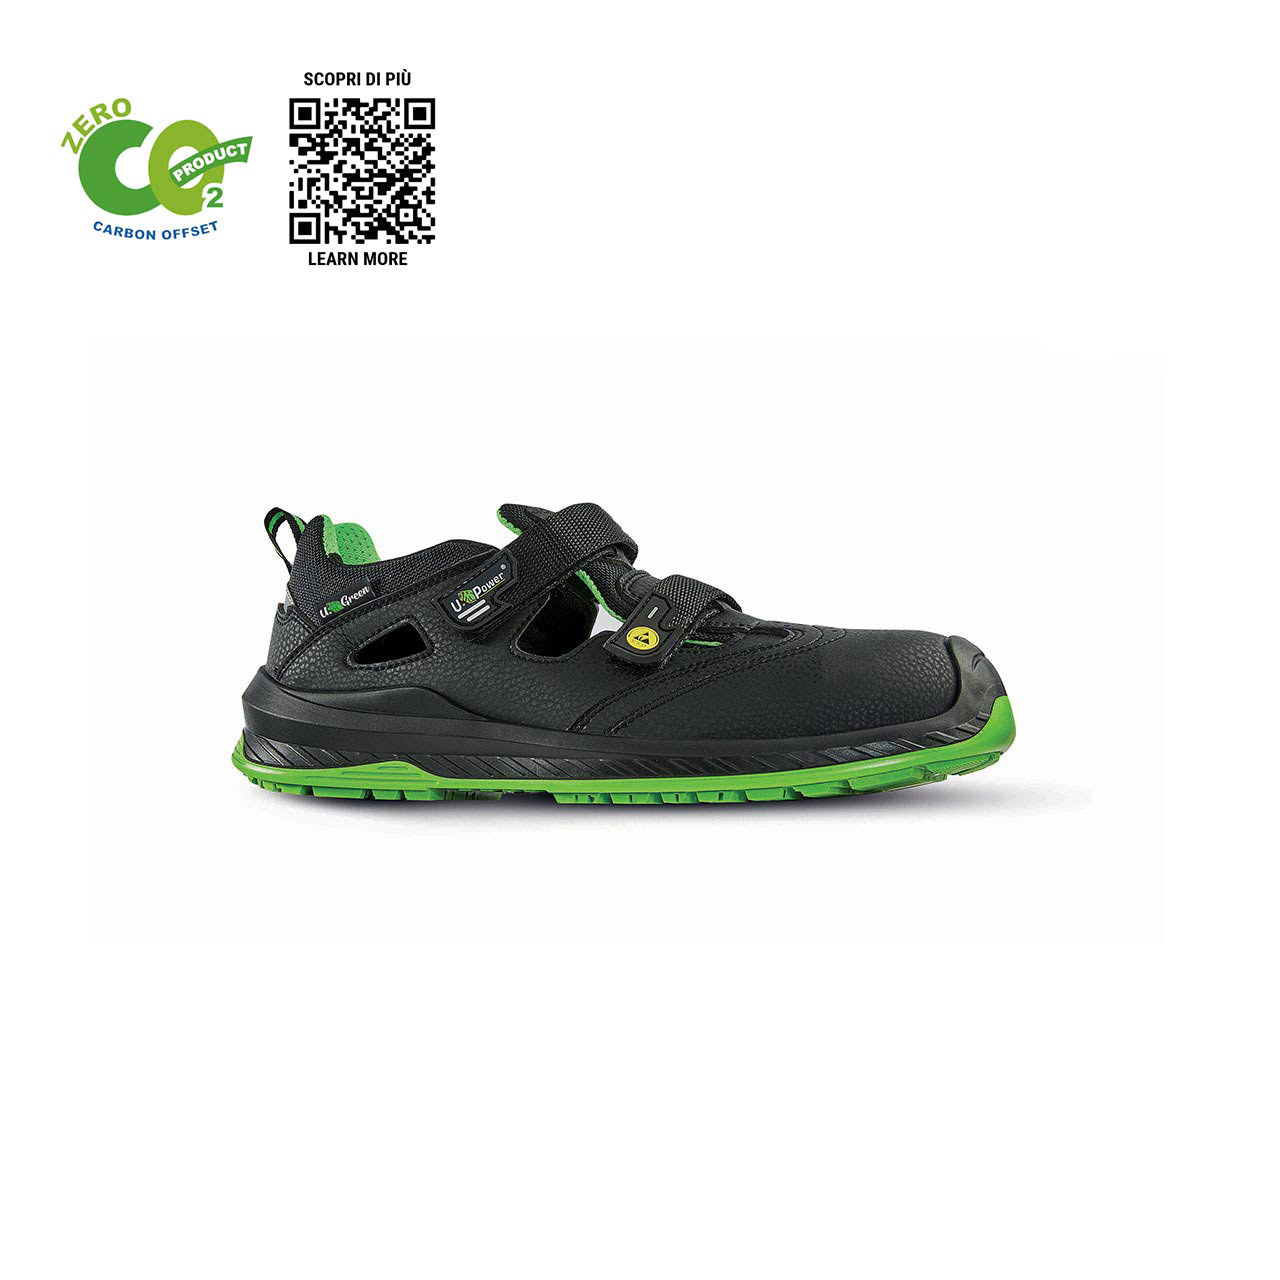 upower scarpa antinfortunistica modello brook uk linea red industry green vista laterale